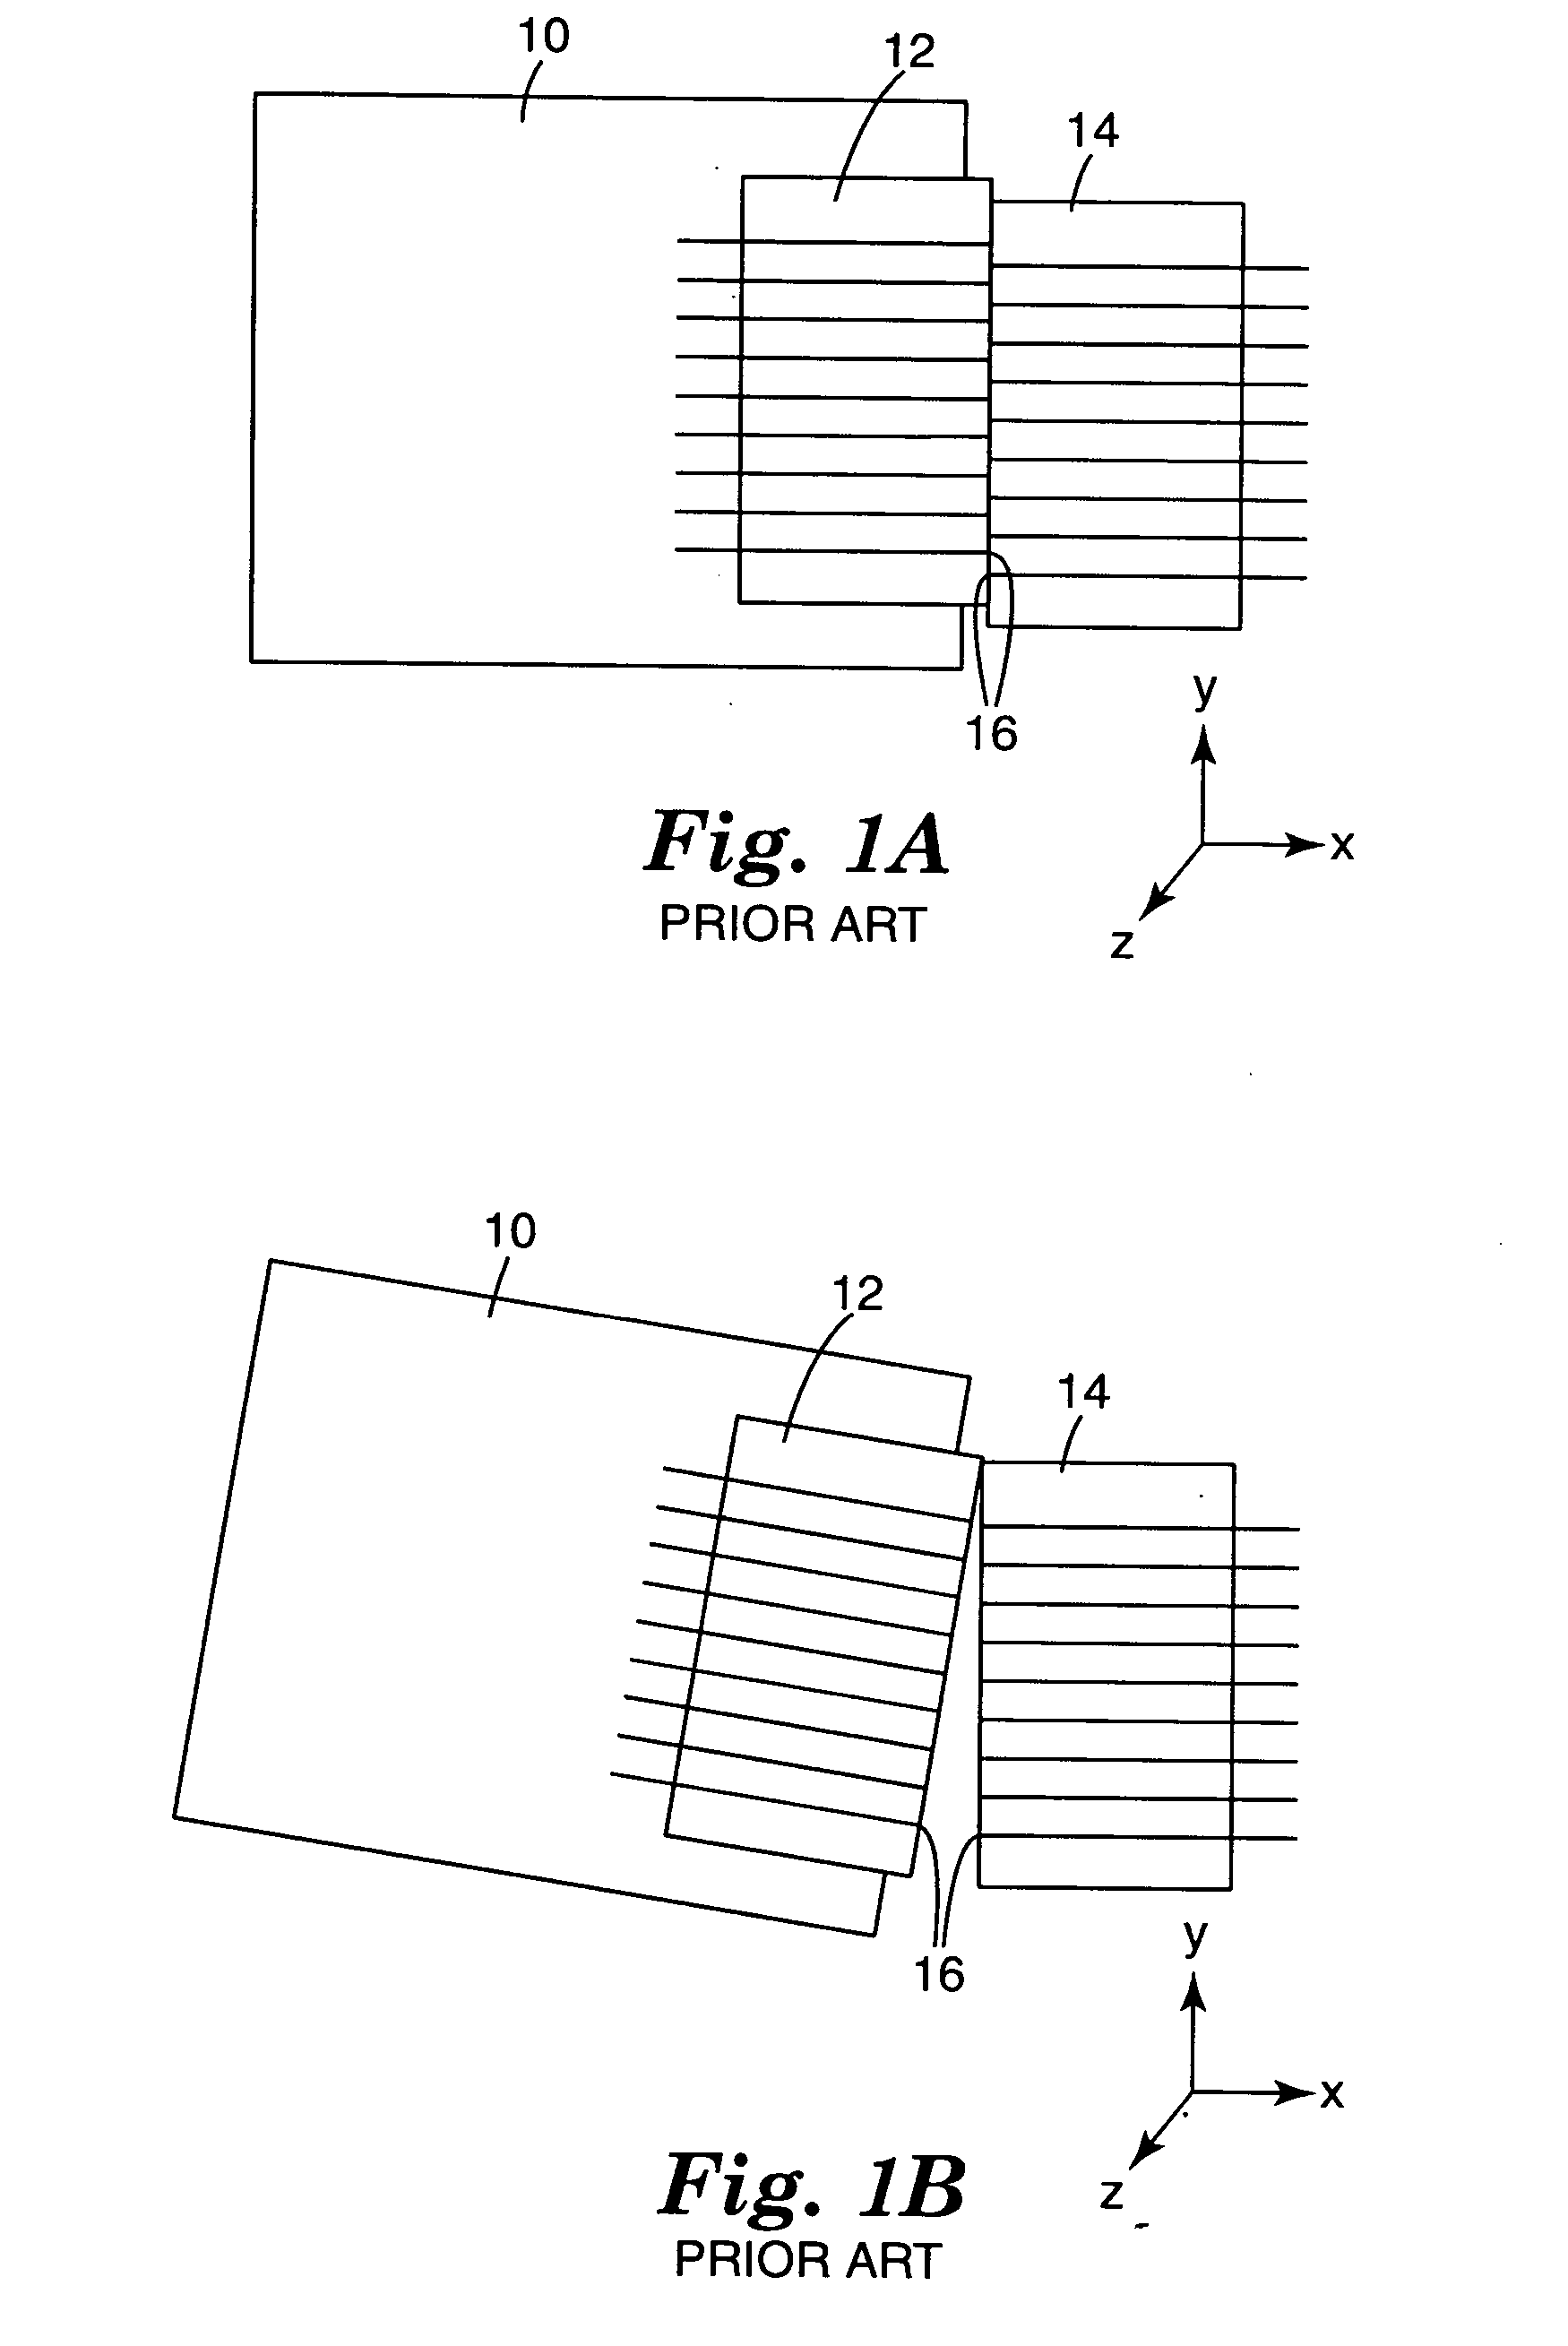 Optical and opto-electronic interconnect alignment system